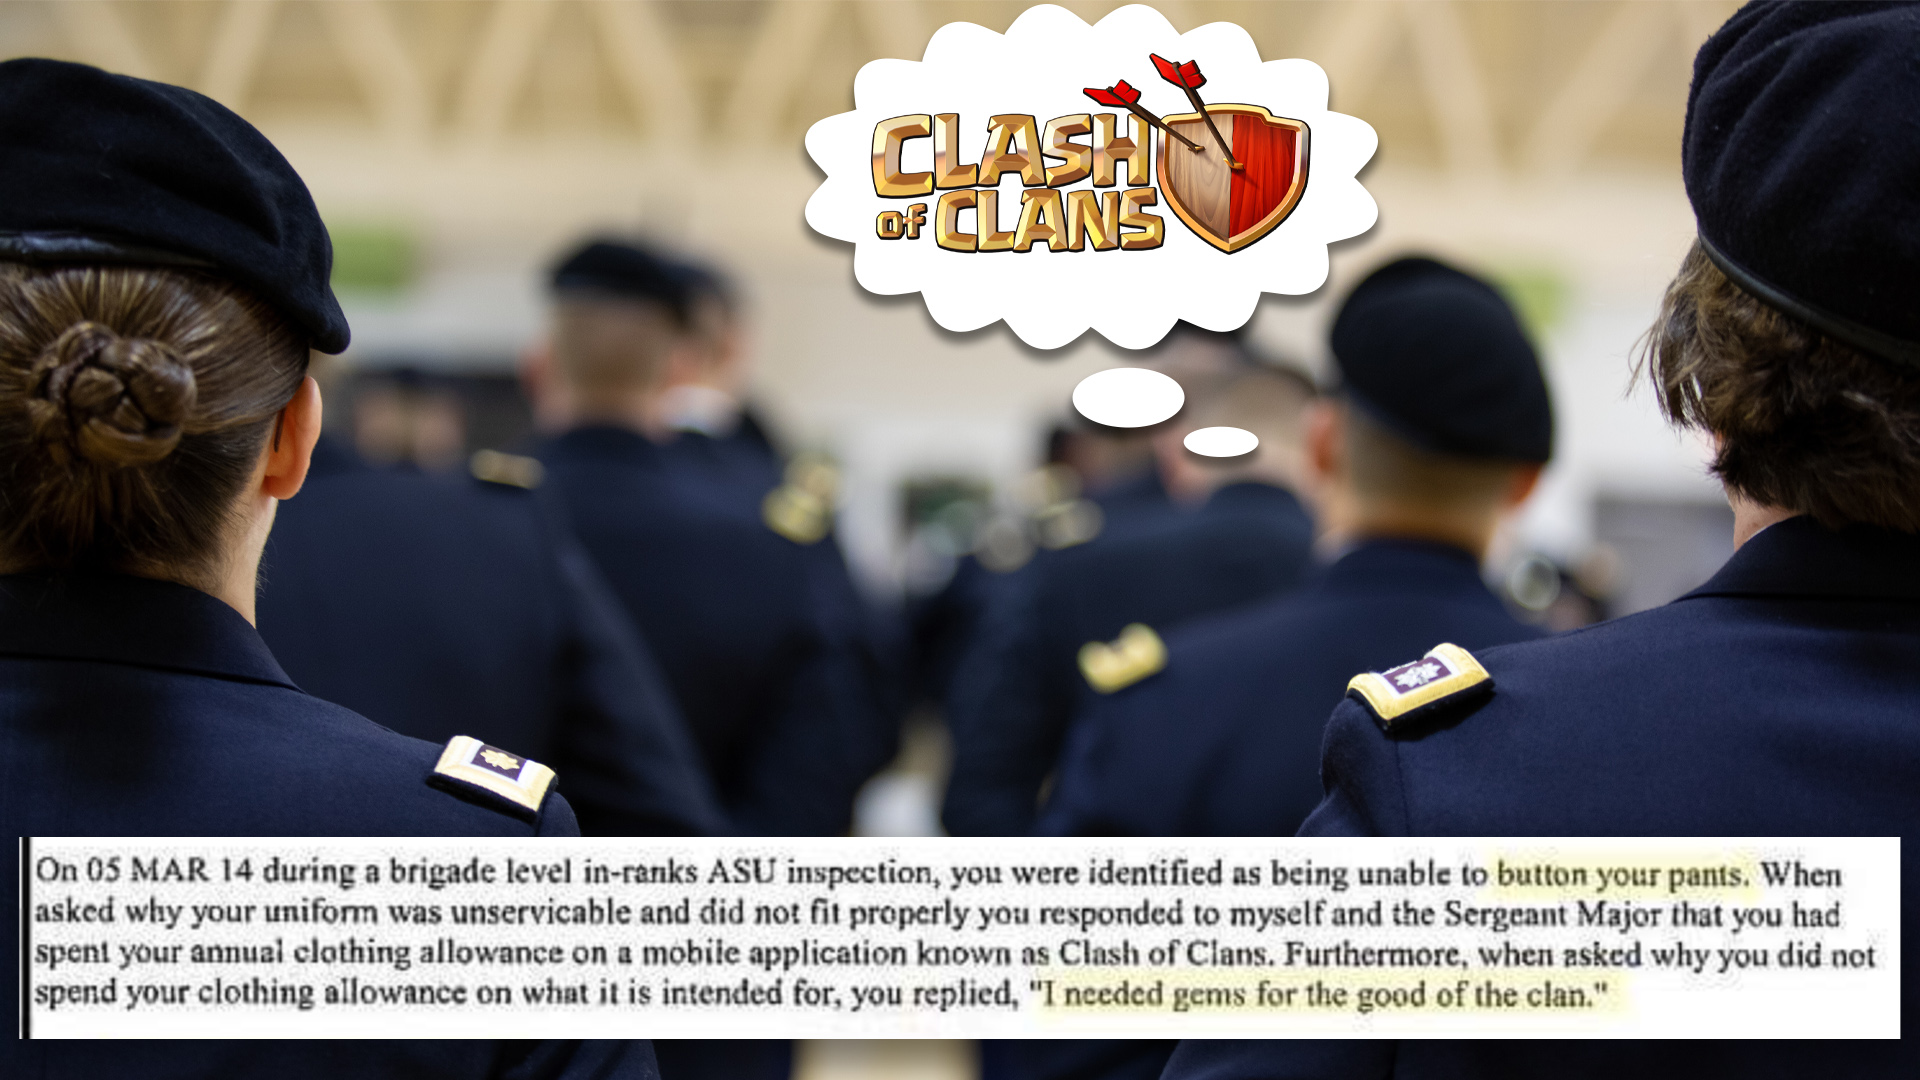 We salute the soldier whose uniform didn’t fit after spending all their money on ‘Clash of Clans’